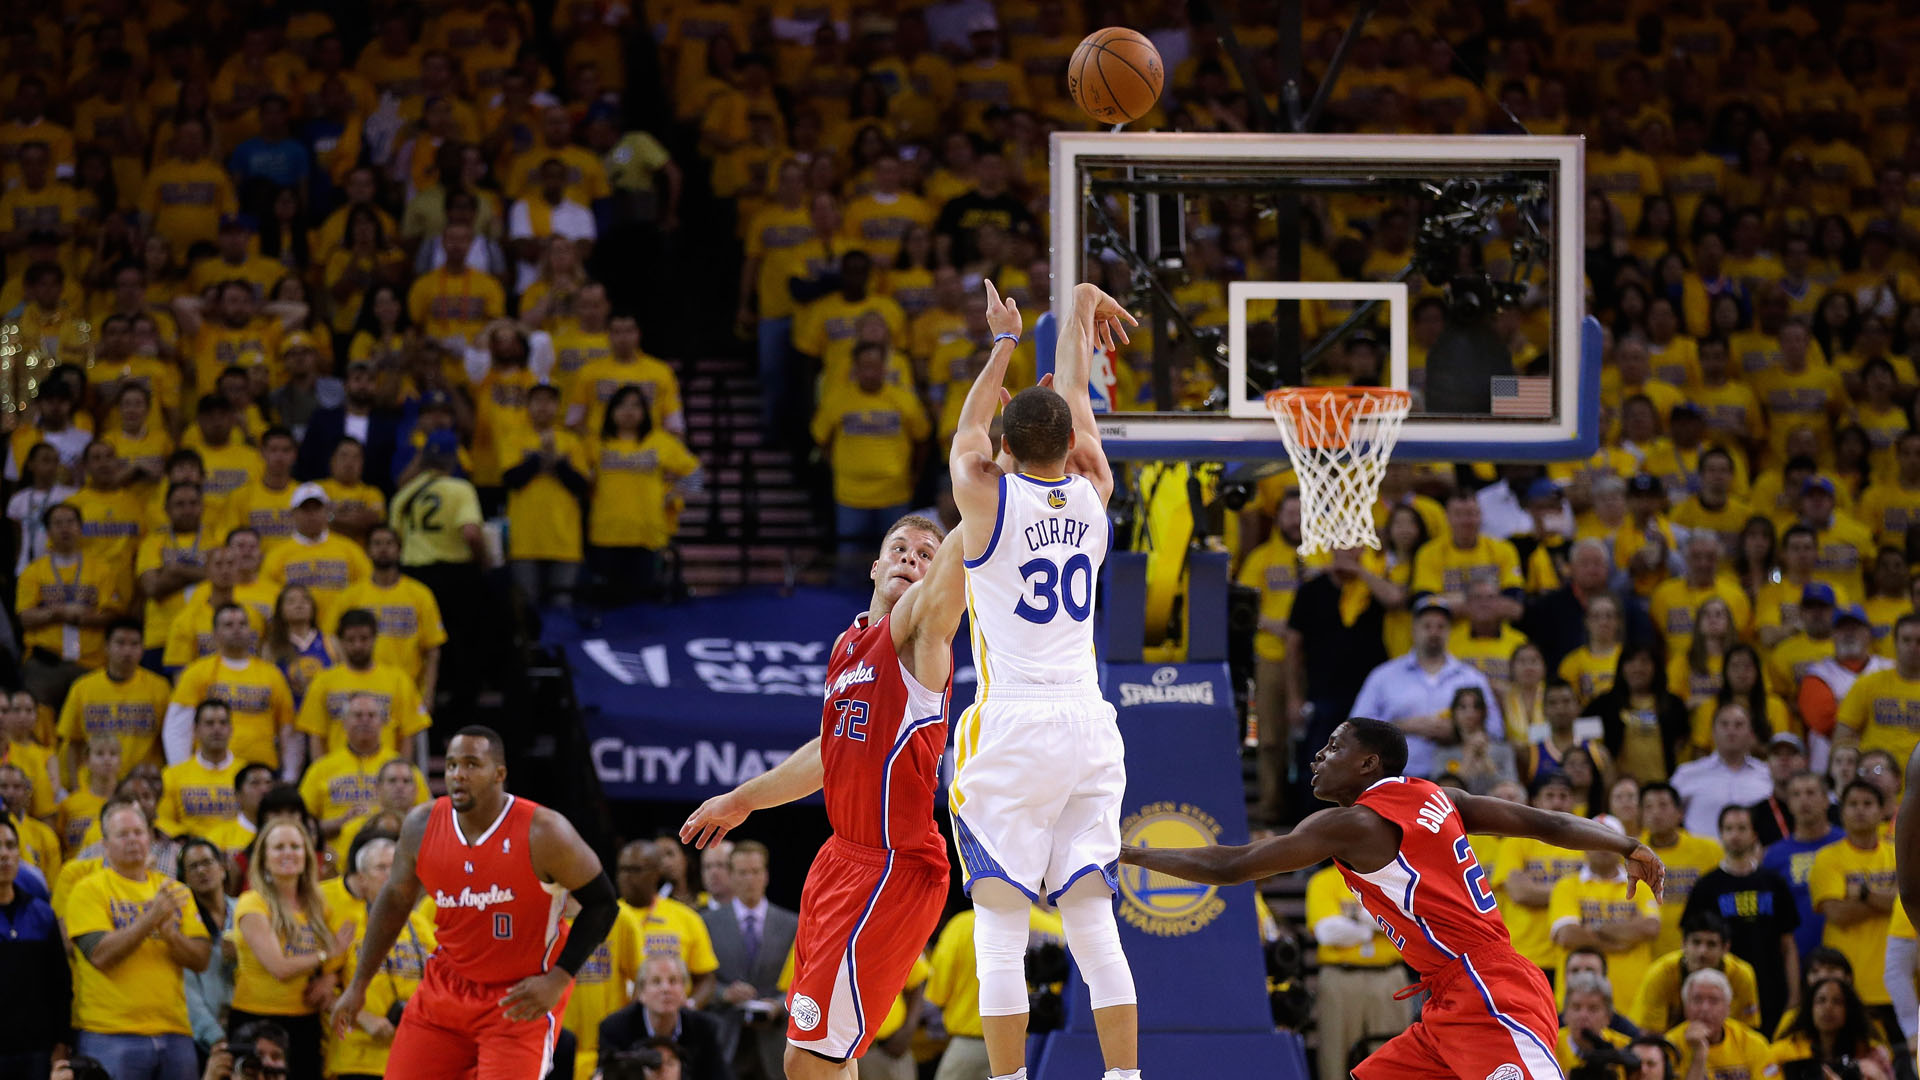 Download Steph Curry Going For Layup Wallpaper